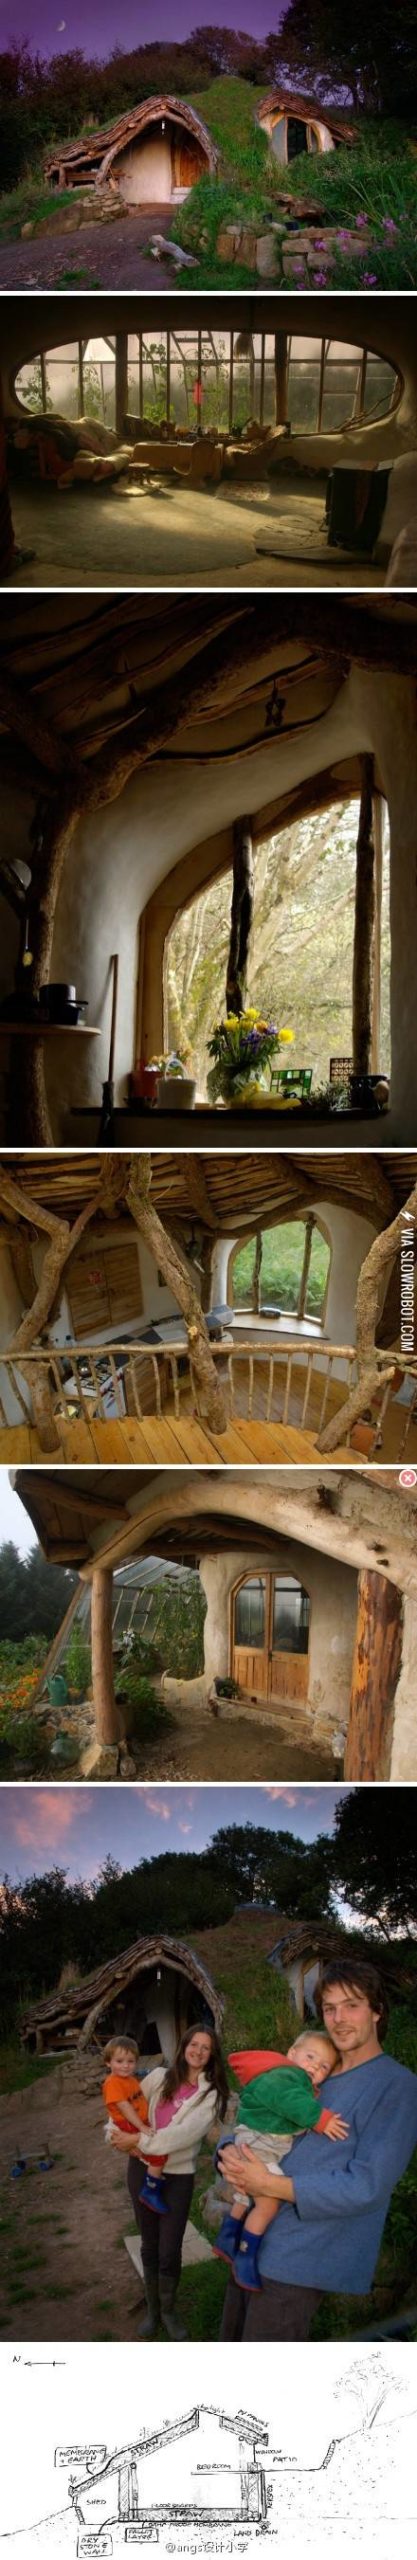 Build+your+own+hobbit+hole+home.